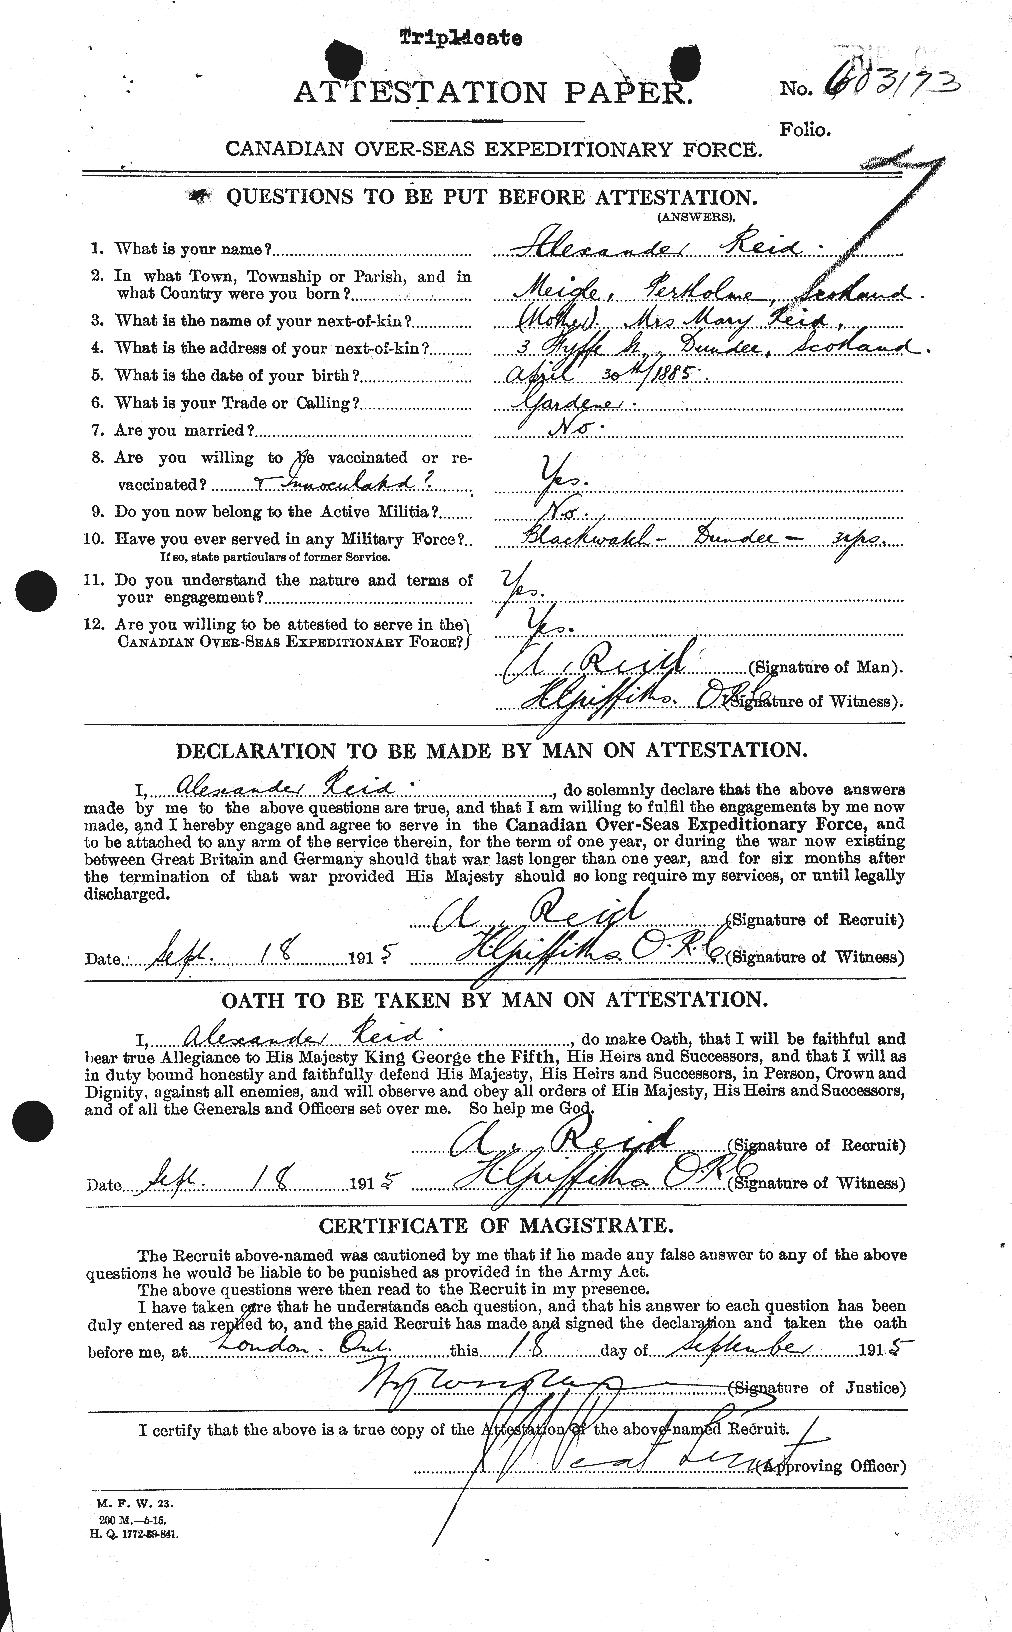 Personnel Records of the First World War - CEF 597760a